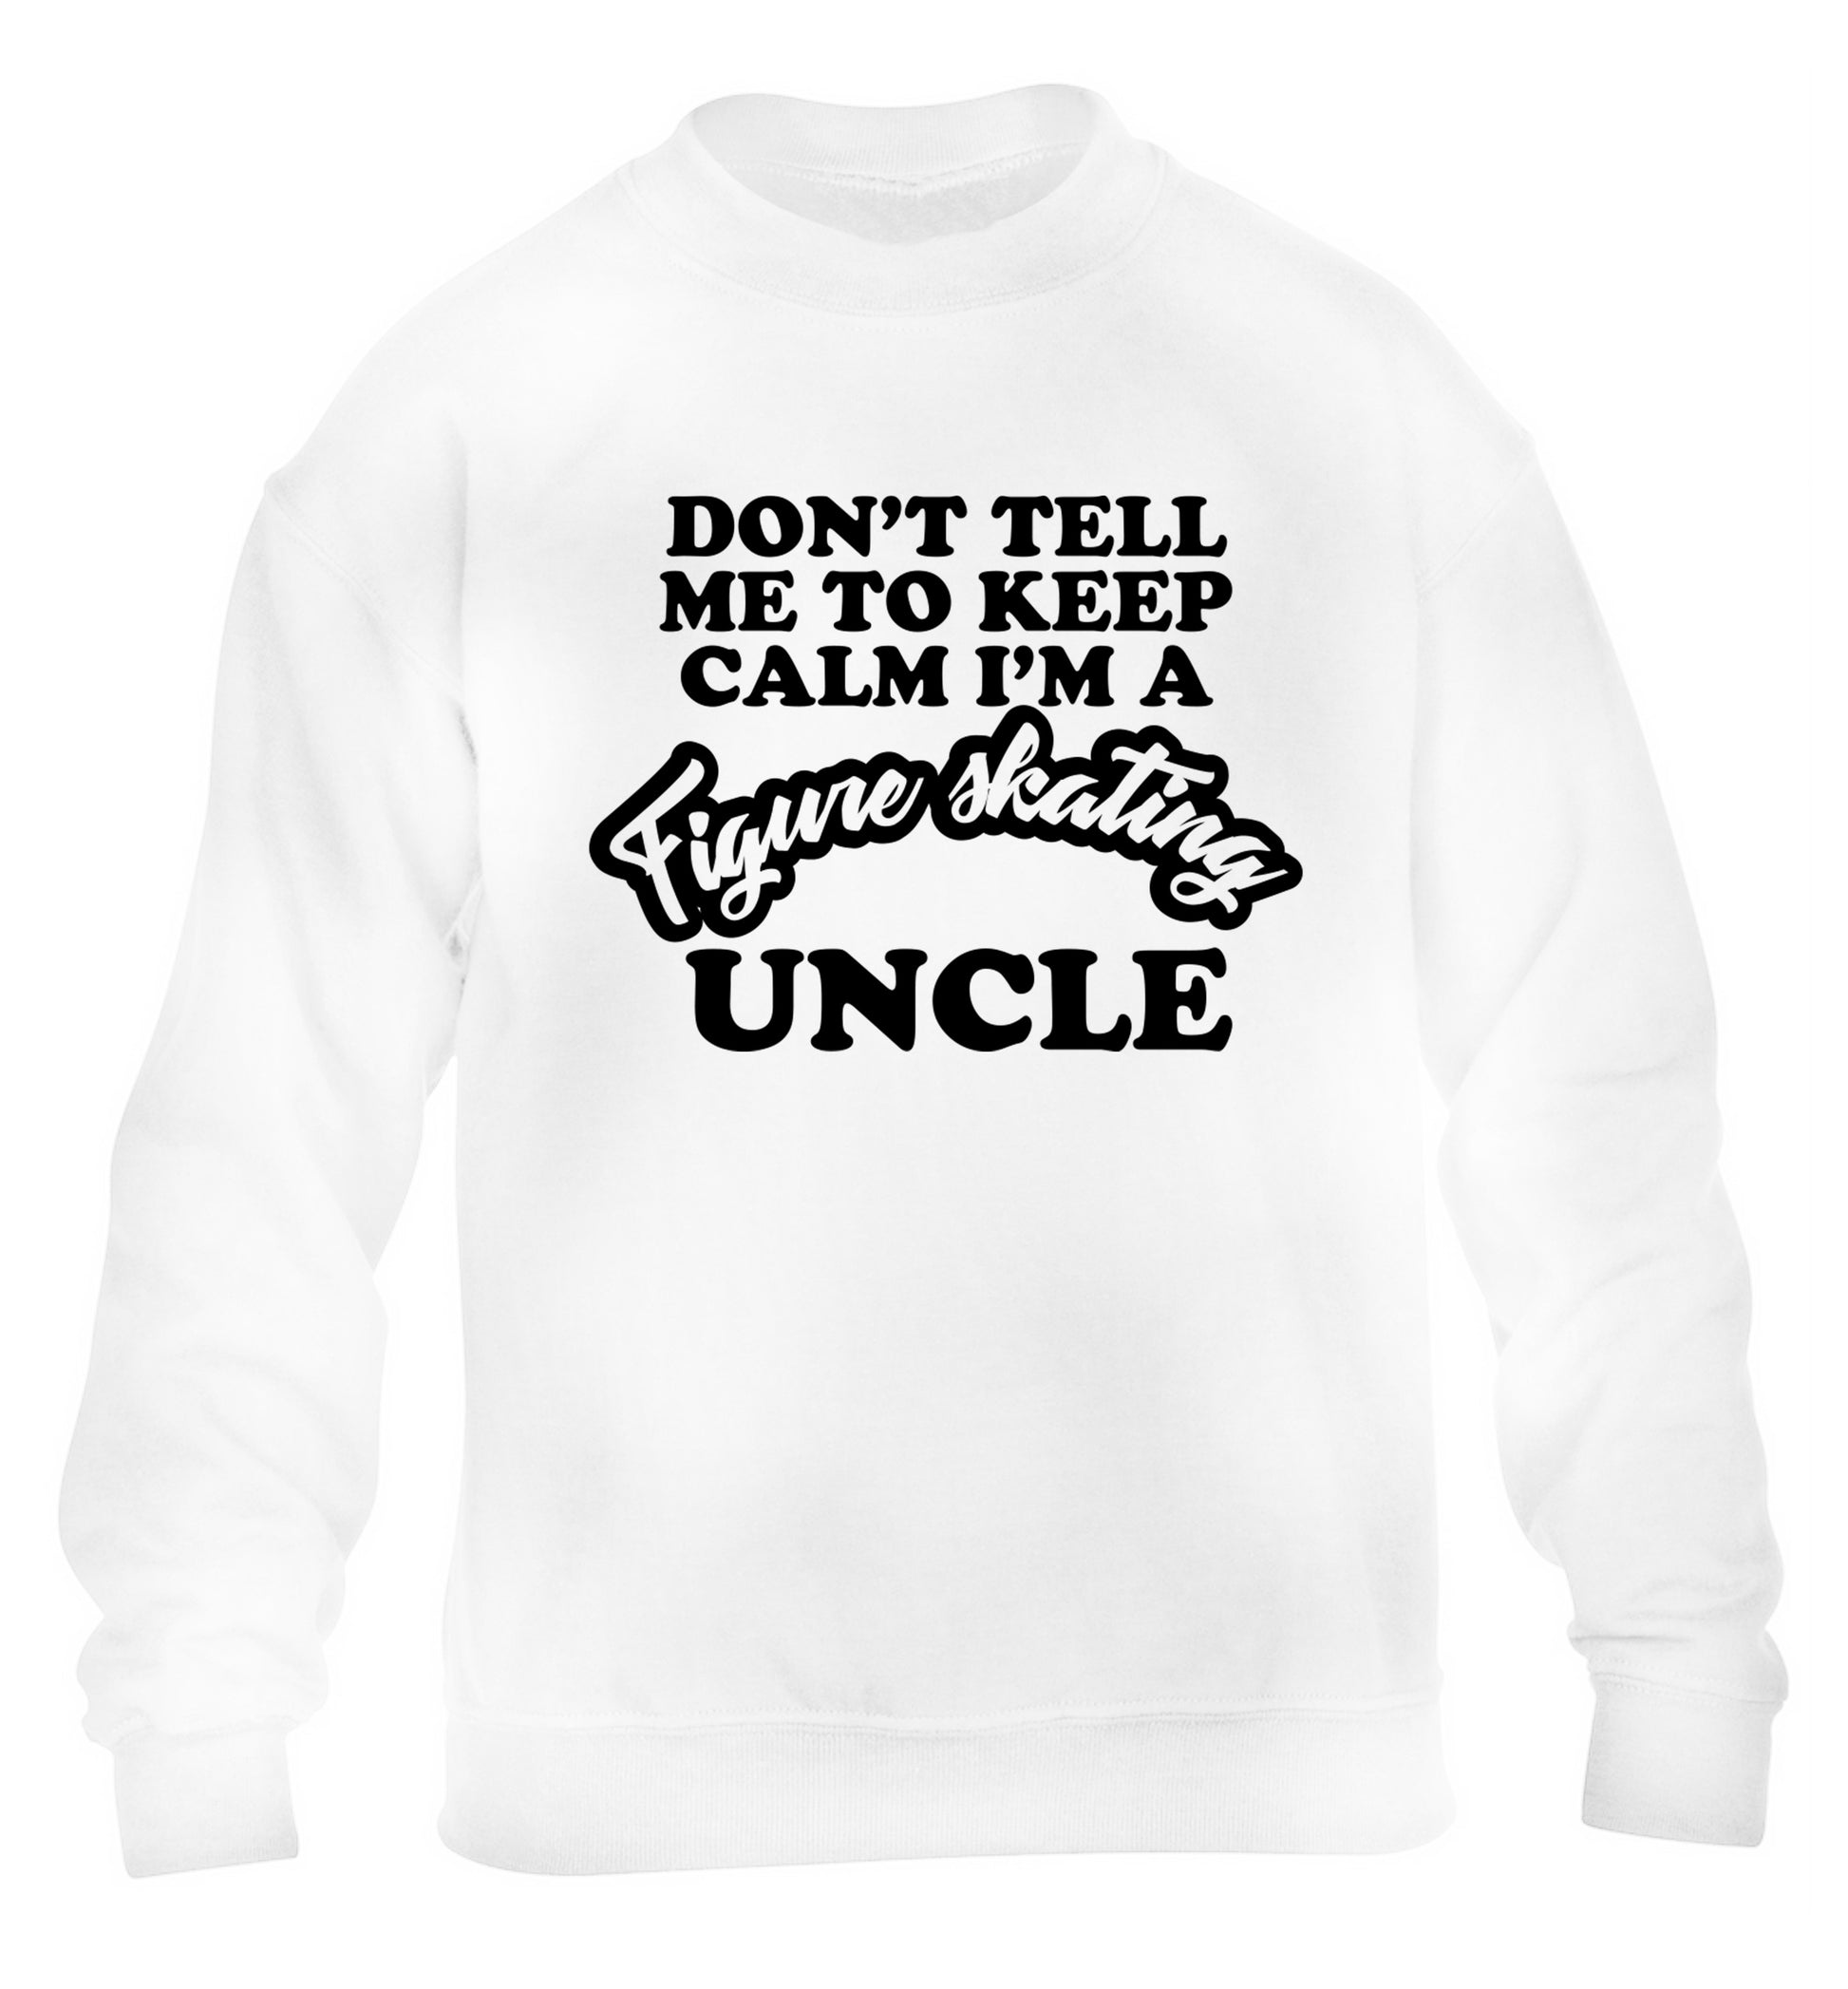 Don't tell me to keep calm I'm a figure skating uncle children's white sweater 12-14 Years